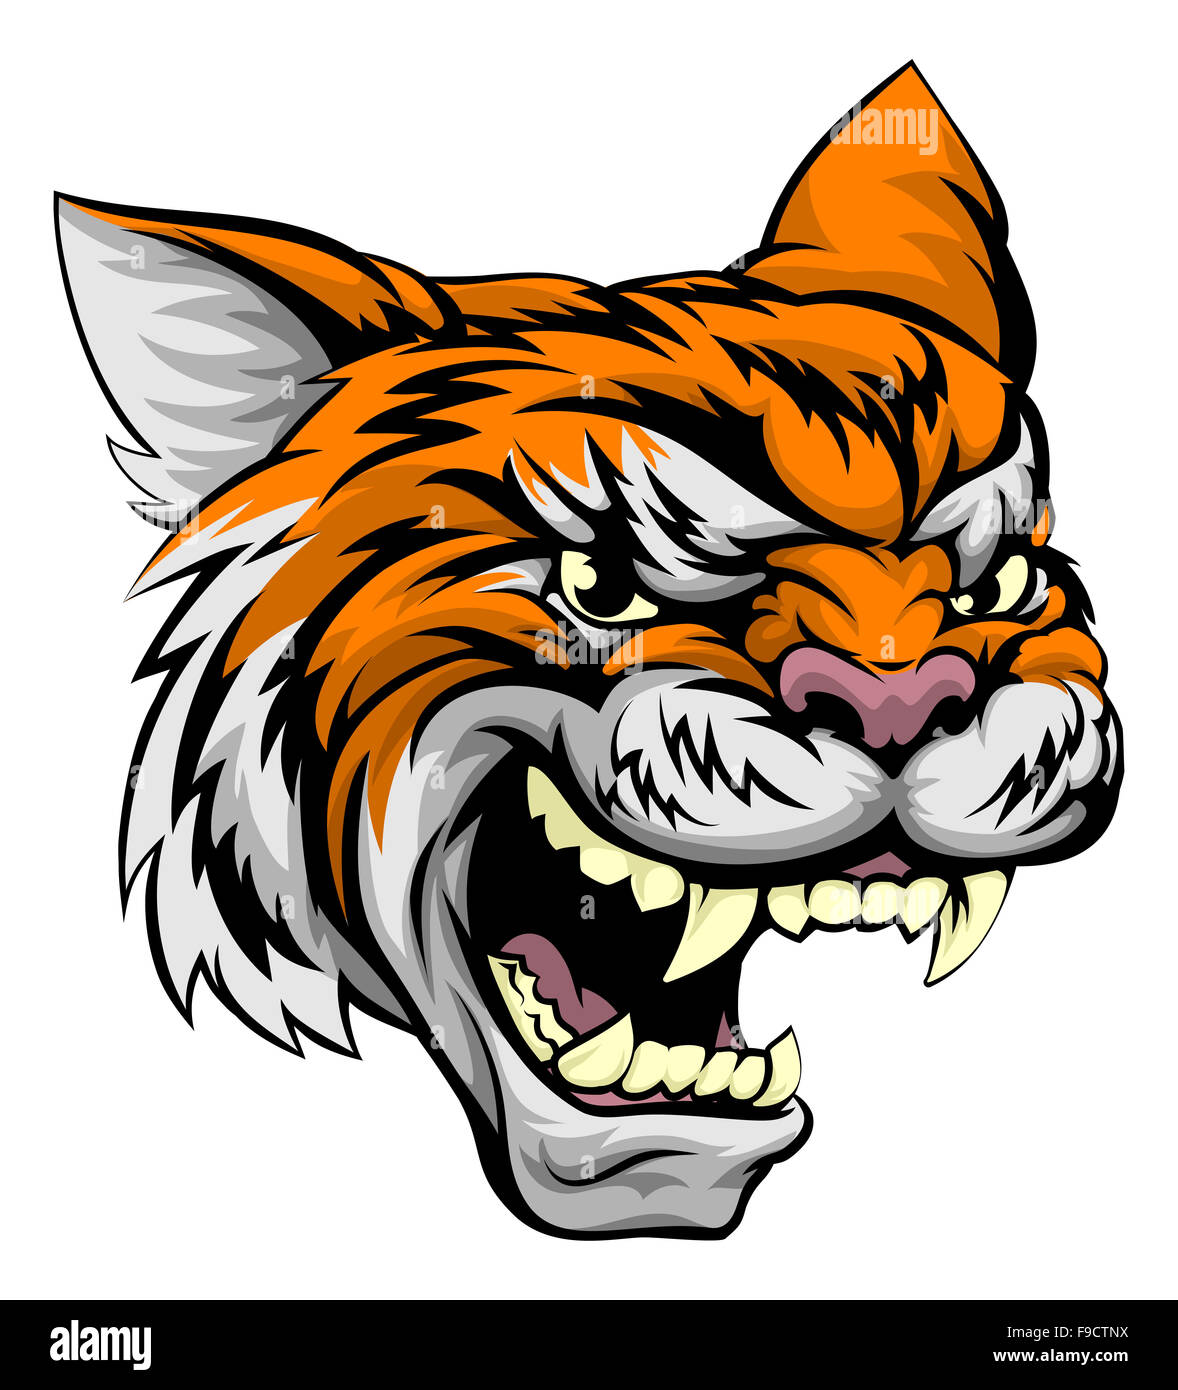 A mean looking tiger sports mascot animal Stock Photo